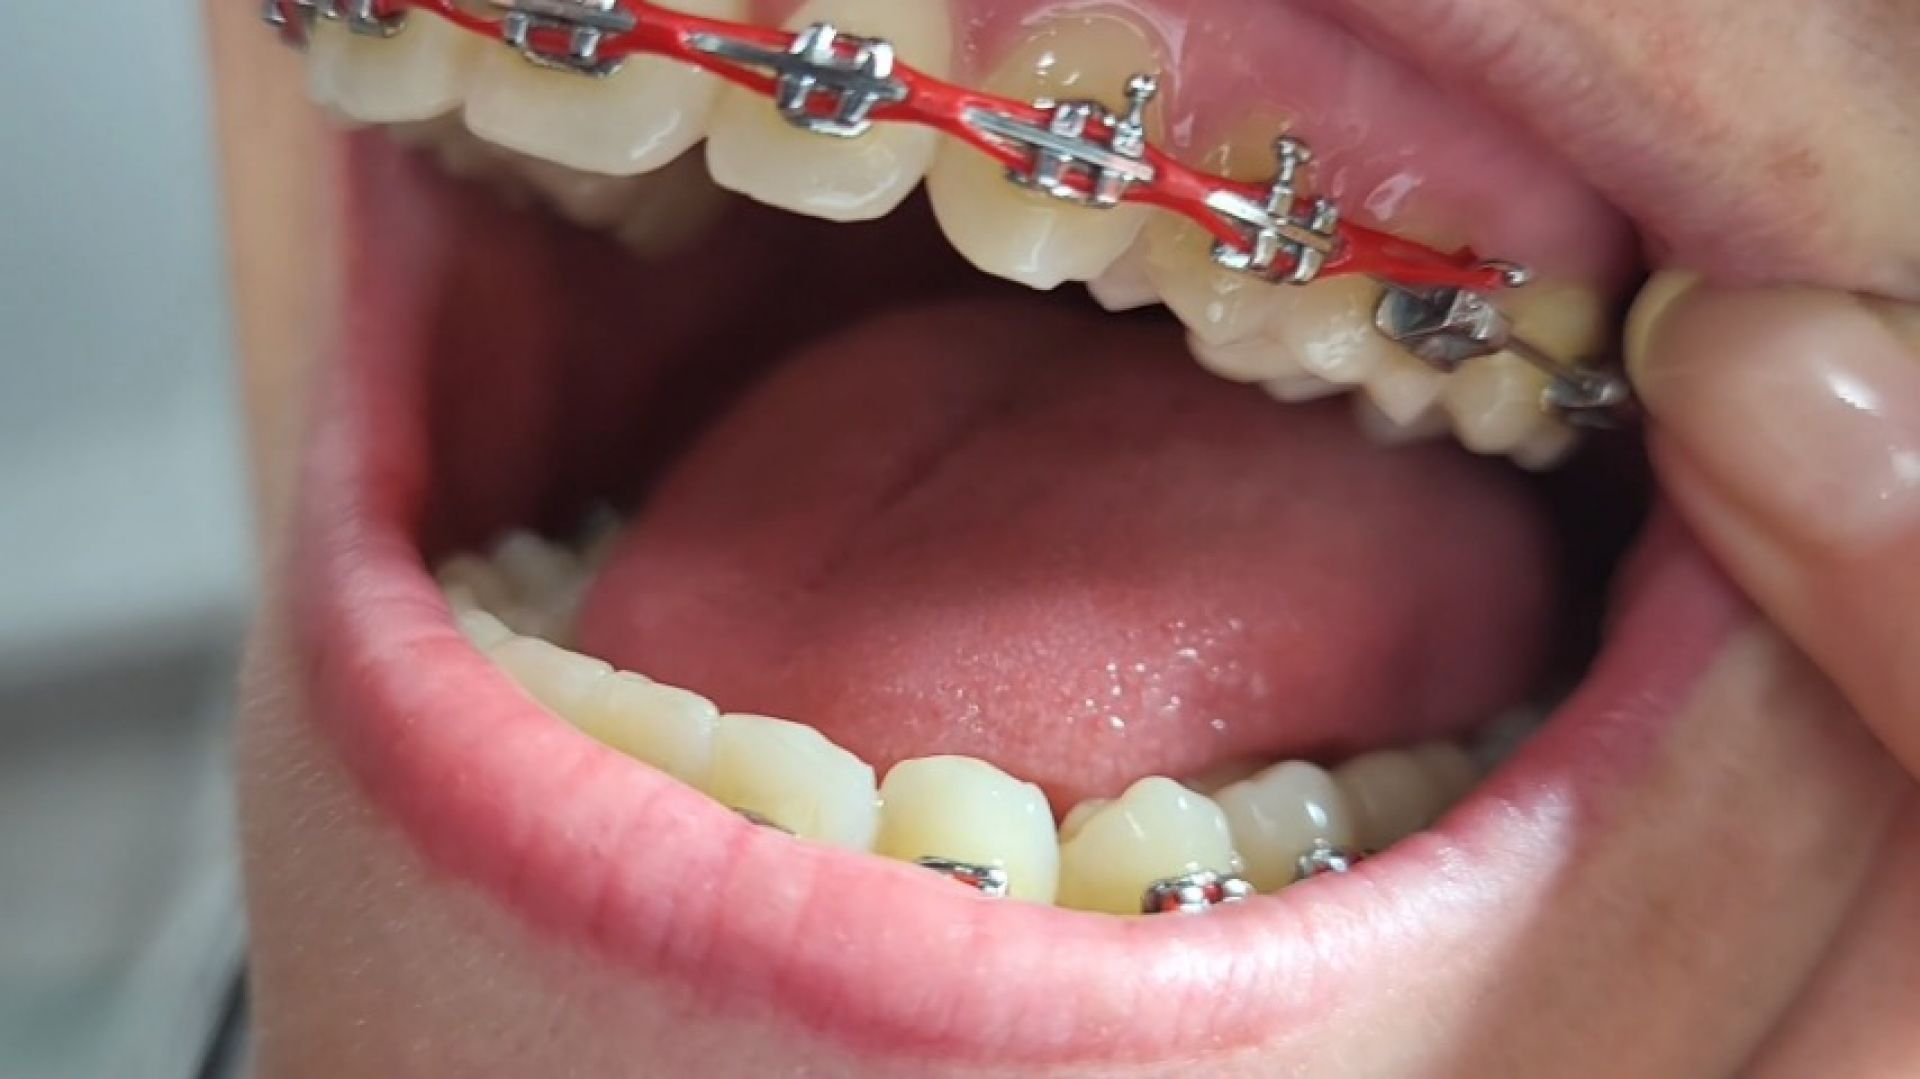 Braces and mouth with saliva fetish